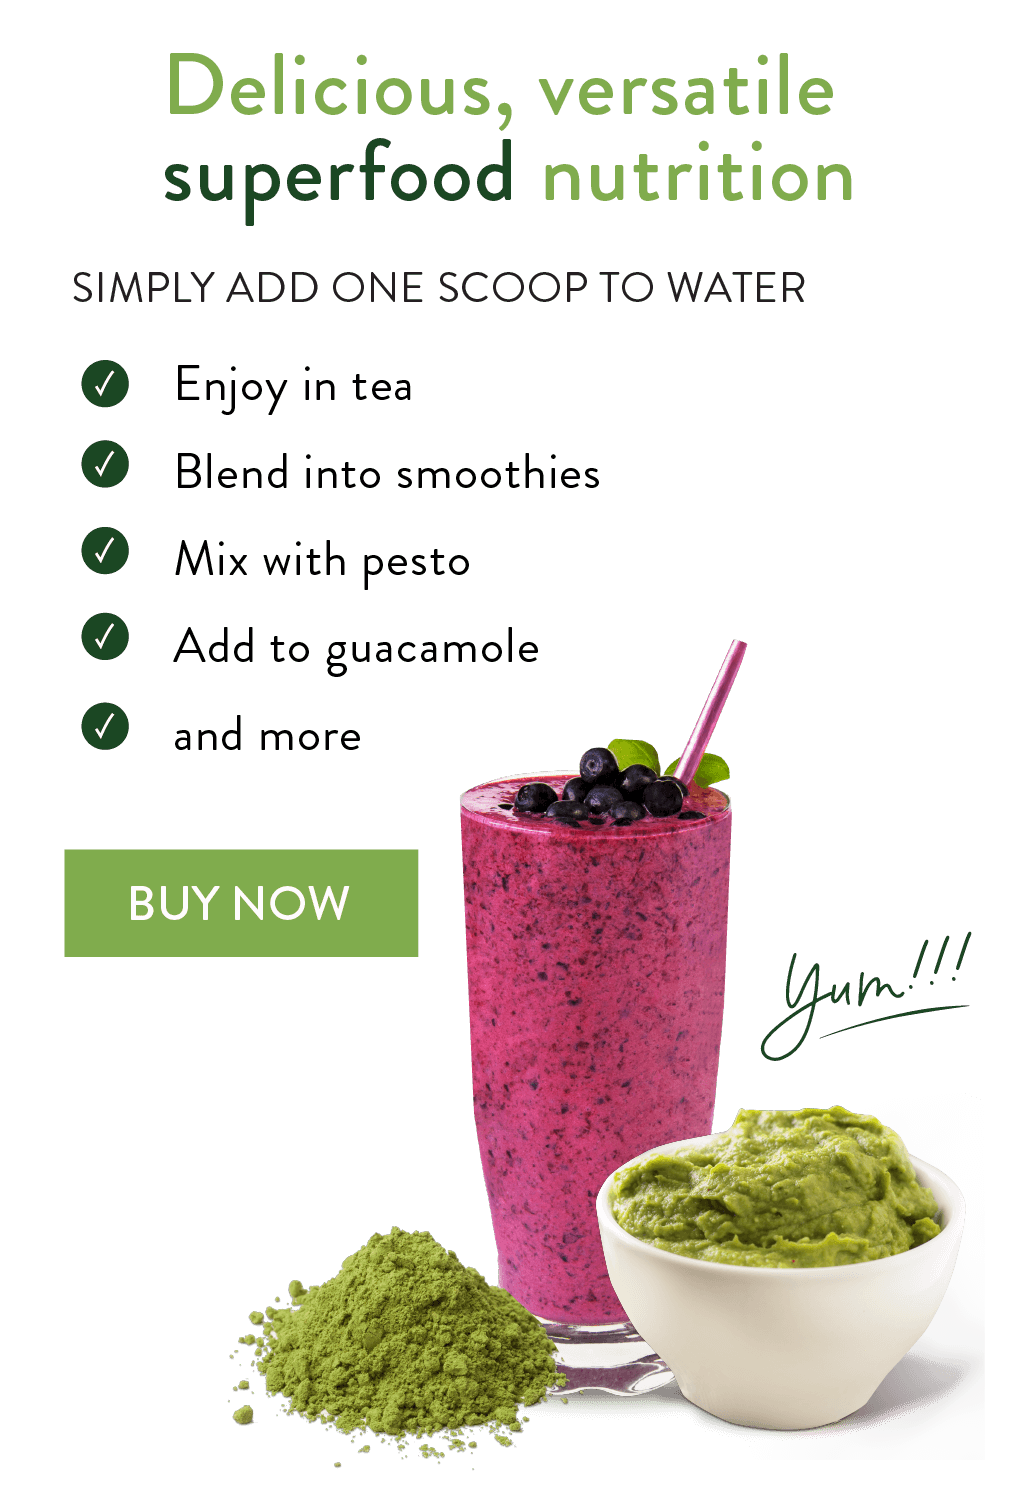 Delicious Versatile superfood nutrition. Simply add one scoop to water. Enjoy in tea, blend into smoothies, mix with pesto, add to guacamole, and more